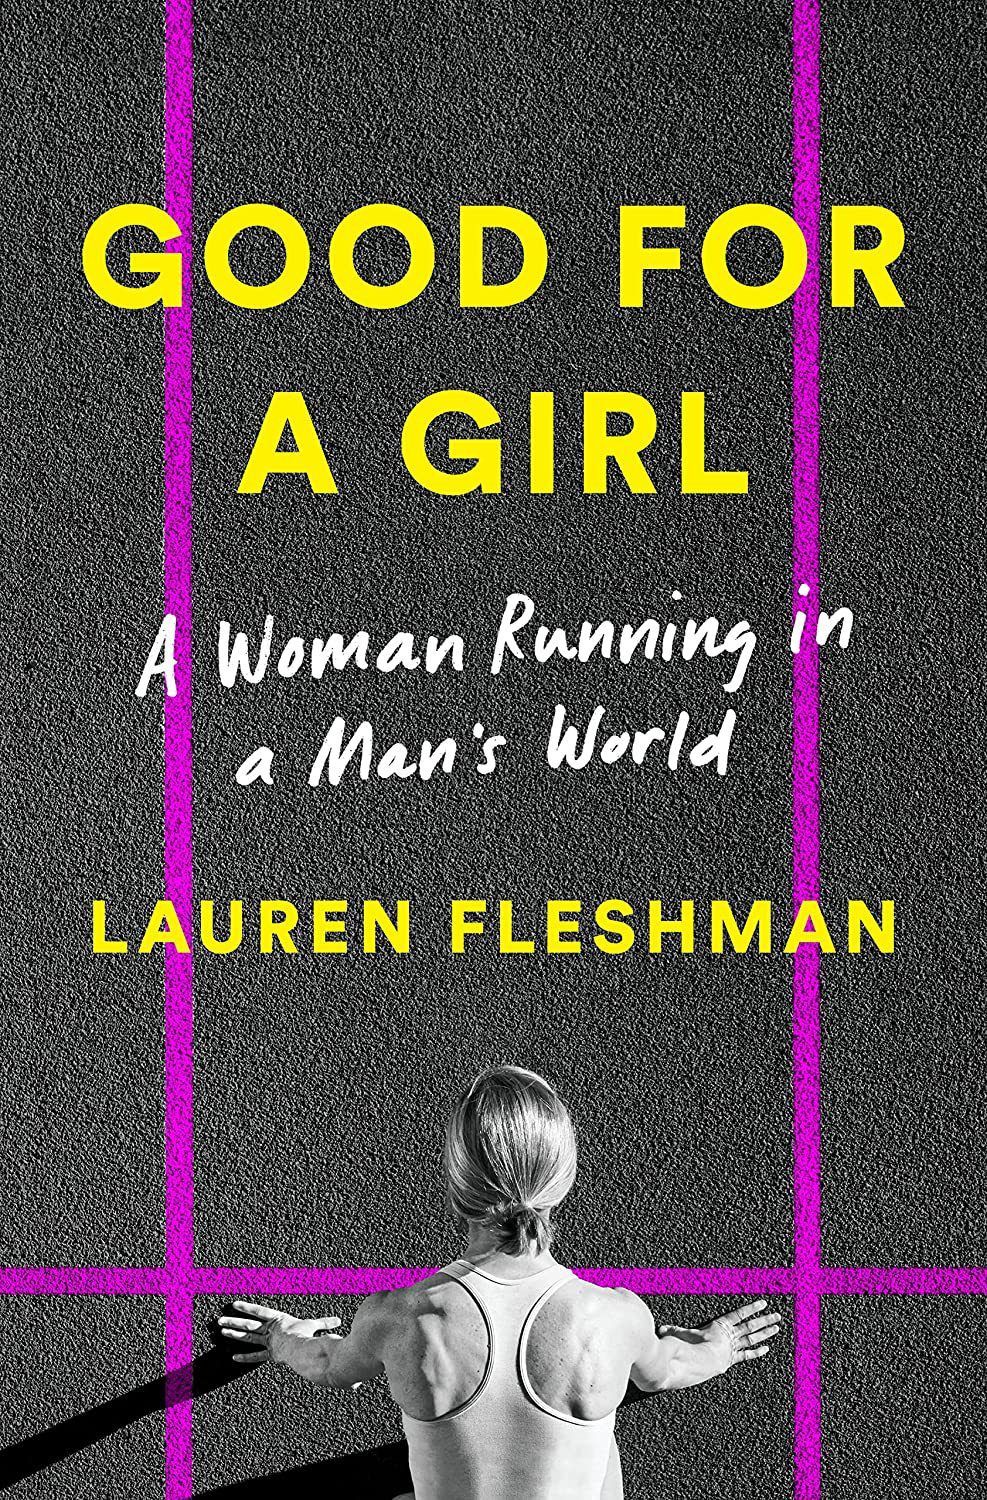 Good for a Girl: A Woman Running in a Man's World